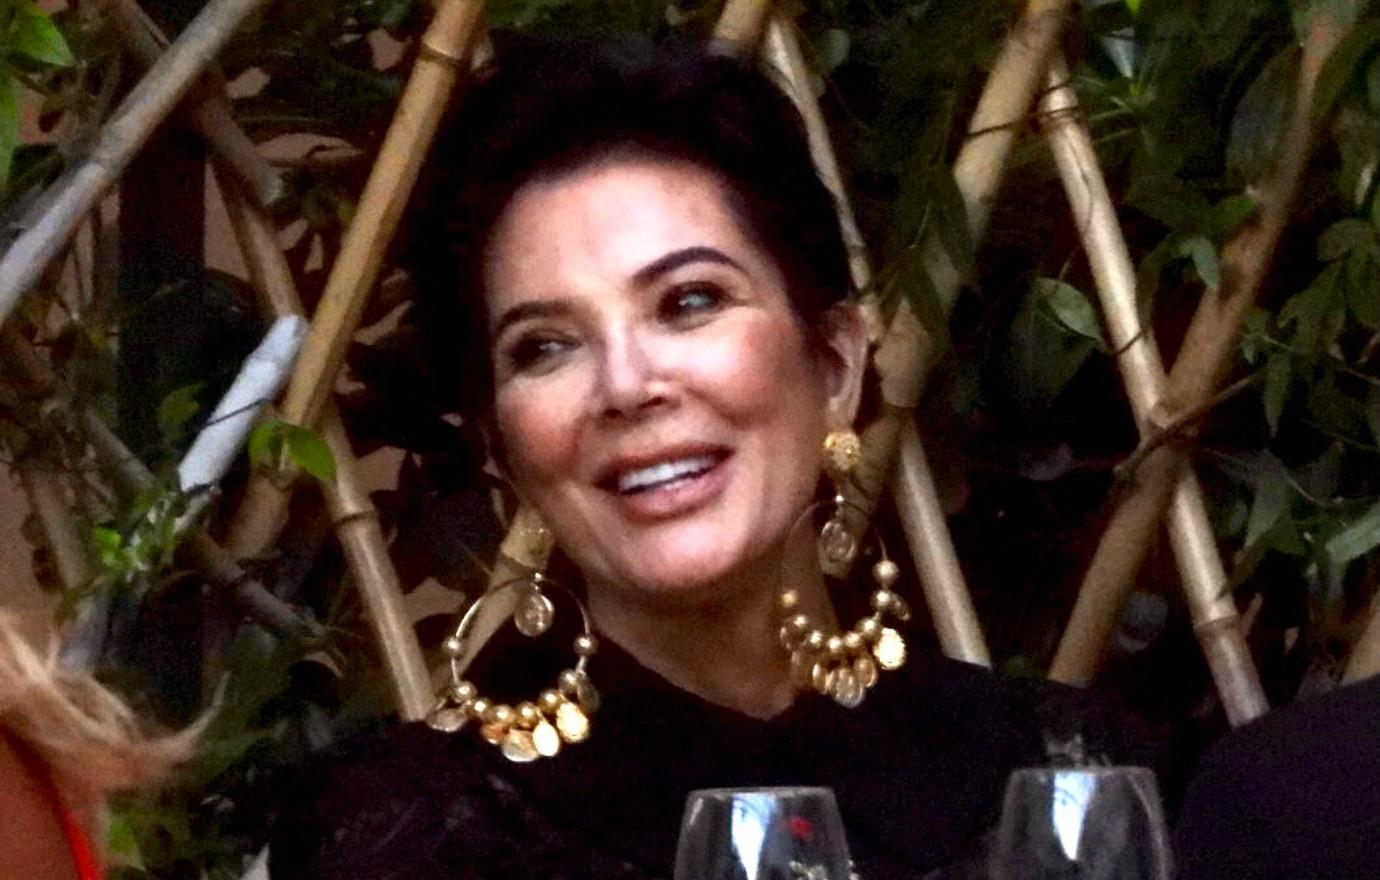 Kris Jenner shows off fresh face with real skin in rare unedited photos  from Italian getaway with boyfriend Corey Gamble